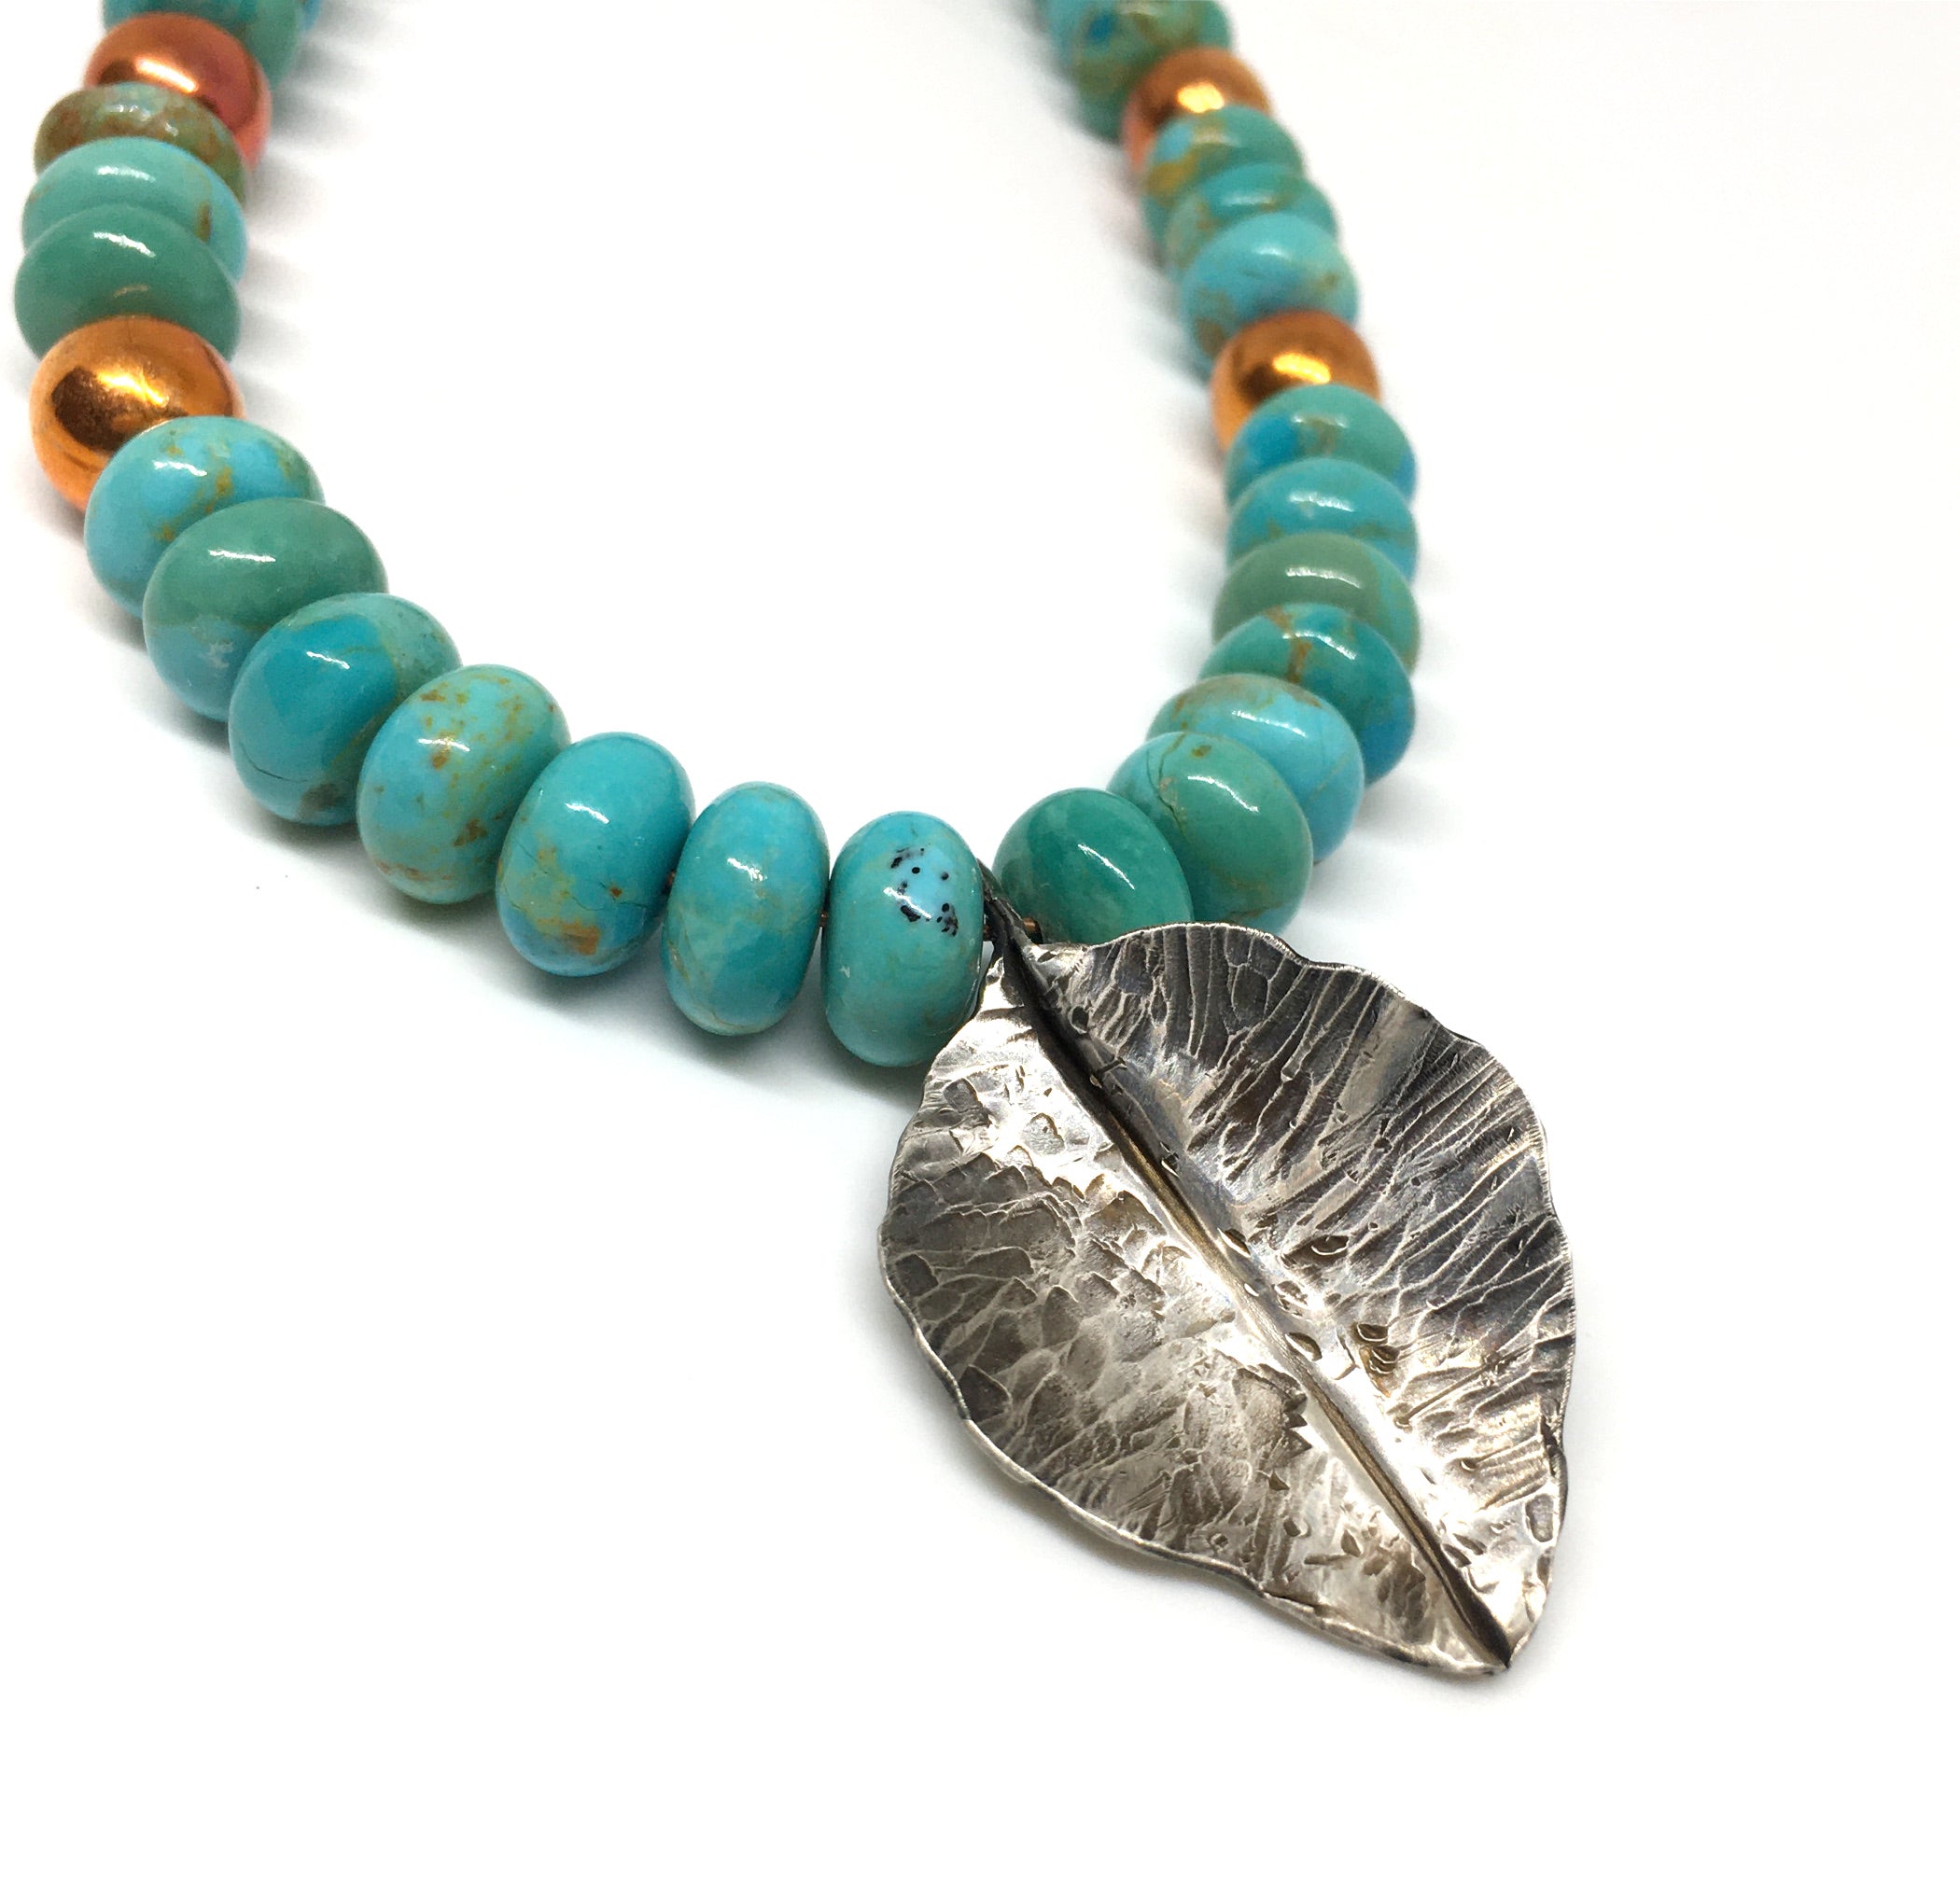 Kingman Turquoise, Apache Gold Gemstone and Flame Painted Copper Necklace with Hand Forged Silver Leaf - Sonoran Sunset Collection